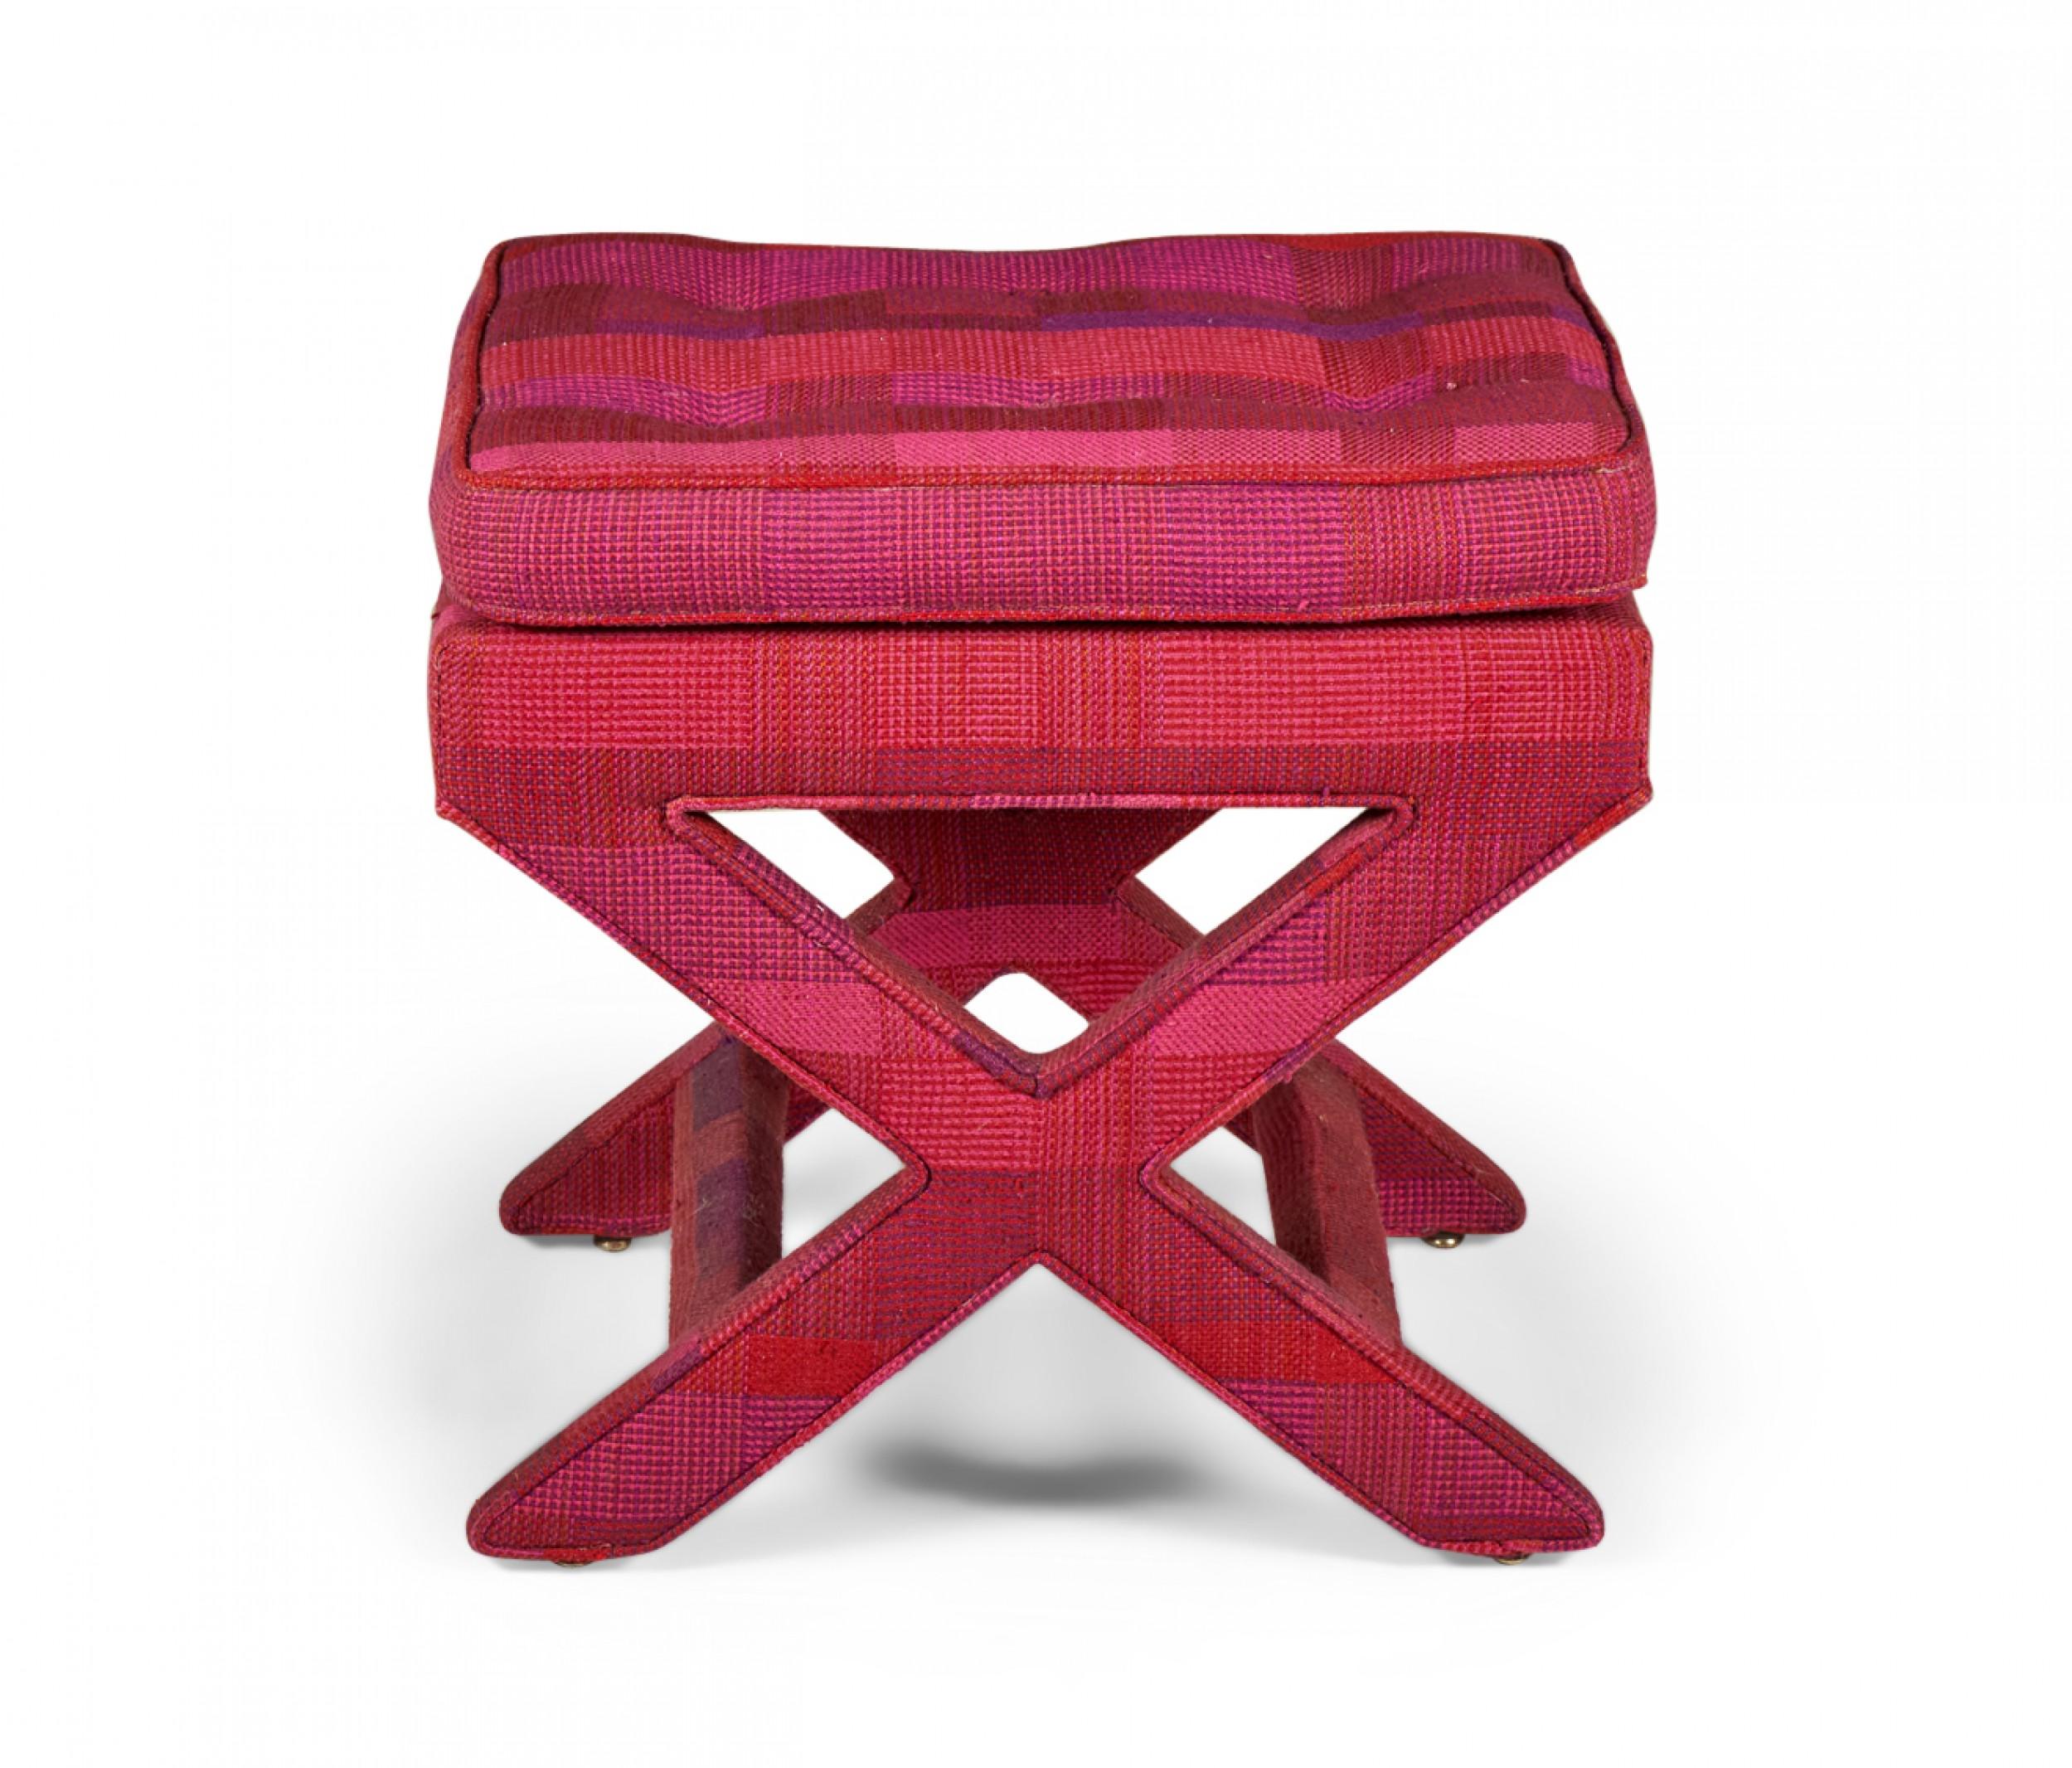 Pair of American Contemporary x-base benches, fully upholstered in a woven fabric in organic stripes of various shades of magenta with button tufted seats. (manner of BILLY BALDWIN)(PRICED AS PAIR)